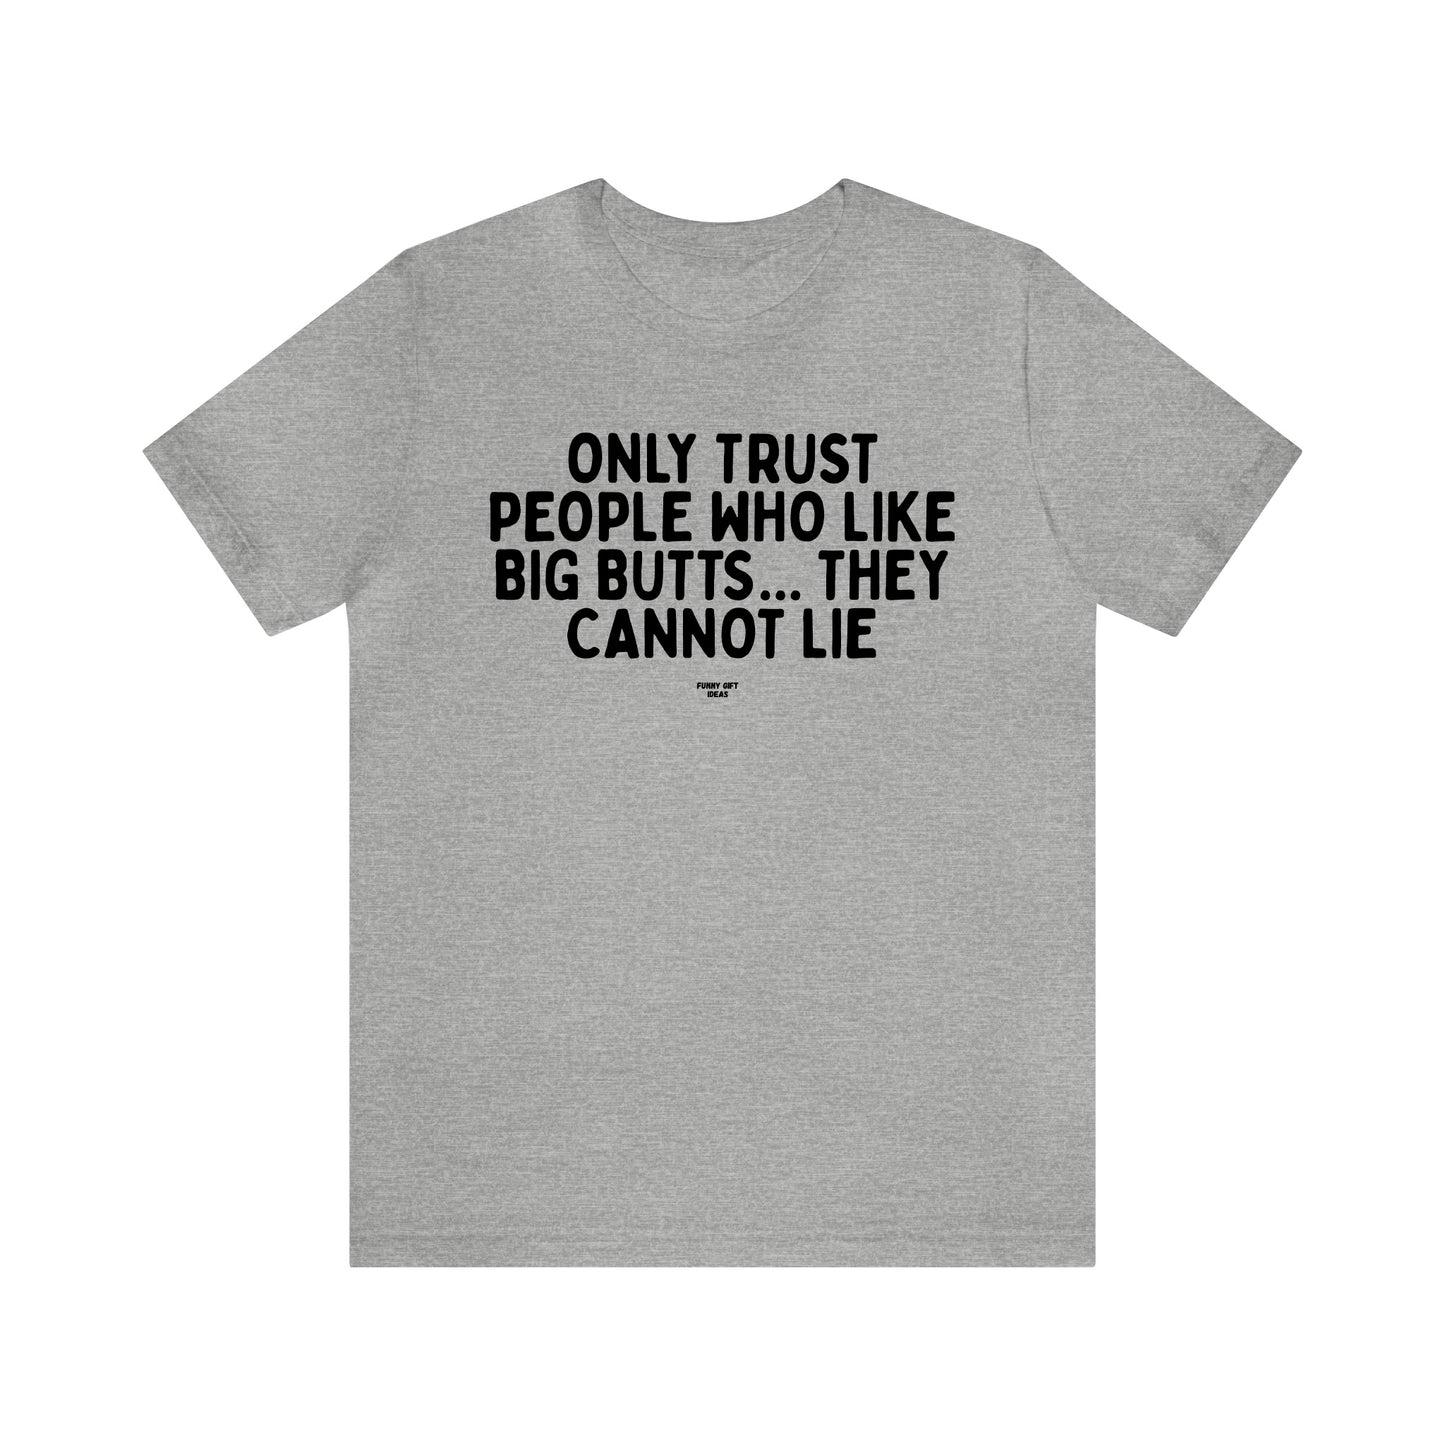 Mens T Shirts - Only Trust People Who Like Big Butts... They Cannot Lie - Funny Men T Shirts